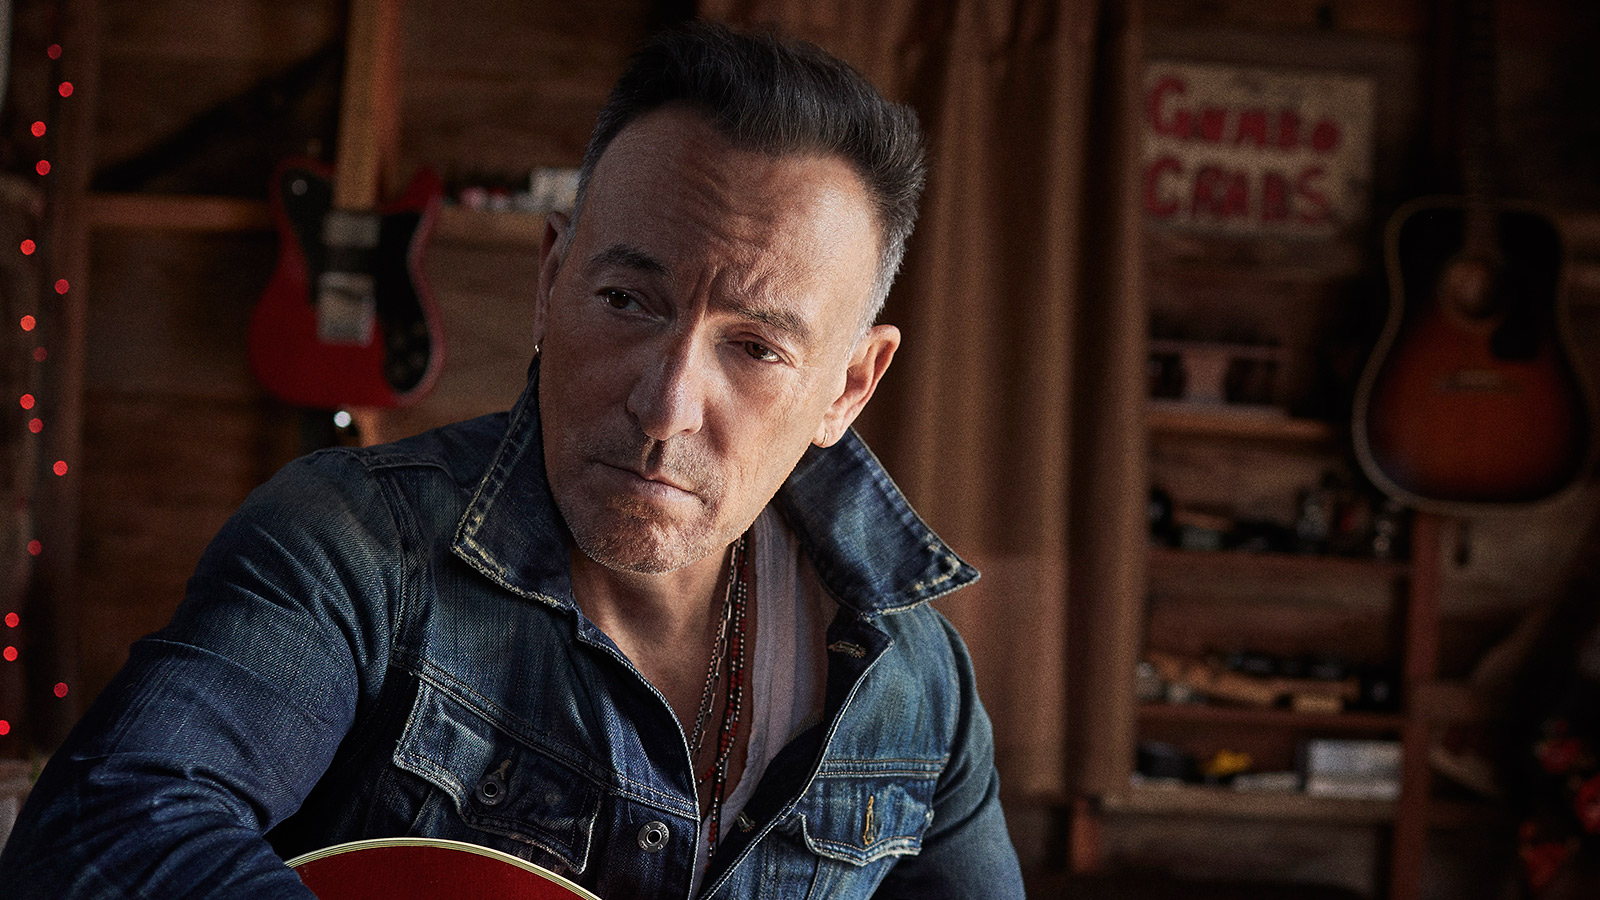 Springsteen embraces veterans and the question of patriotism.